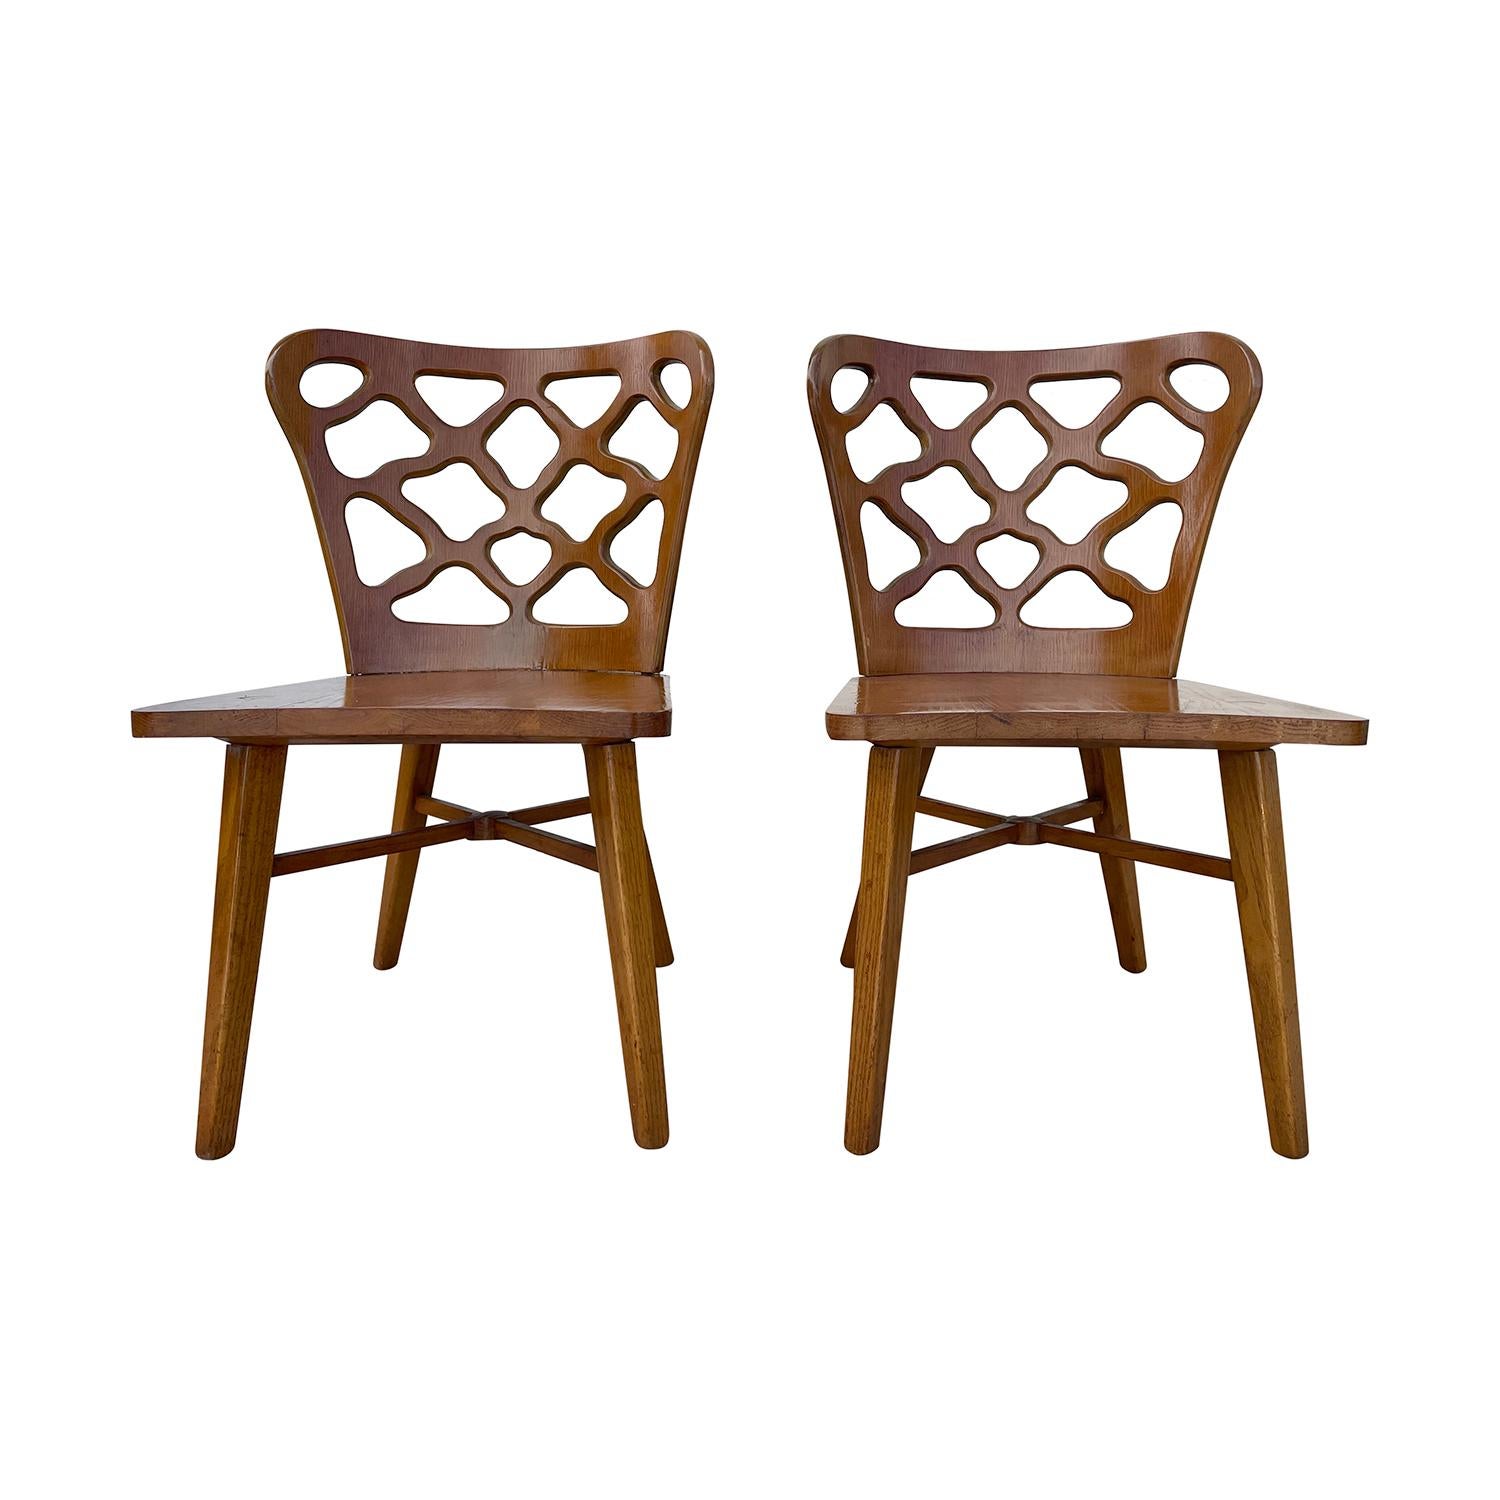 20th Century American Set of Six Oakwood, Bent Plywood Dining Chairs by RomWeber 1